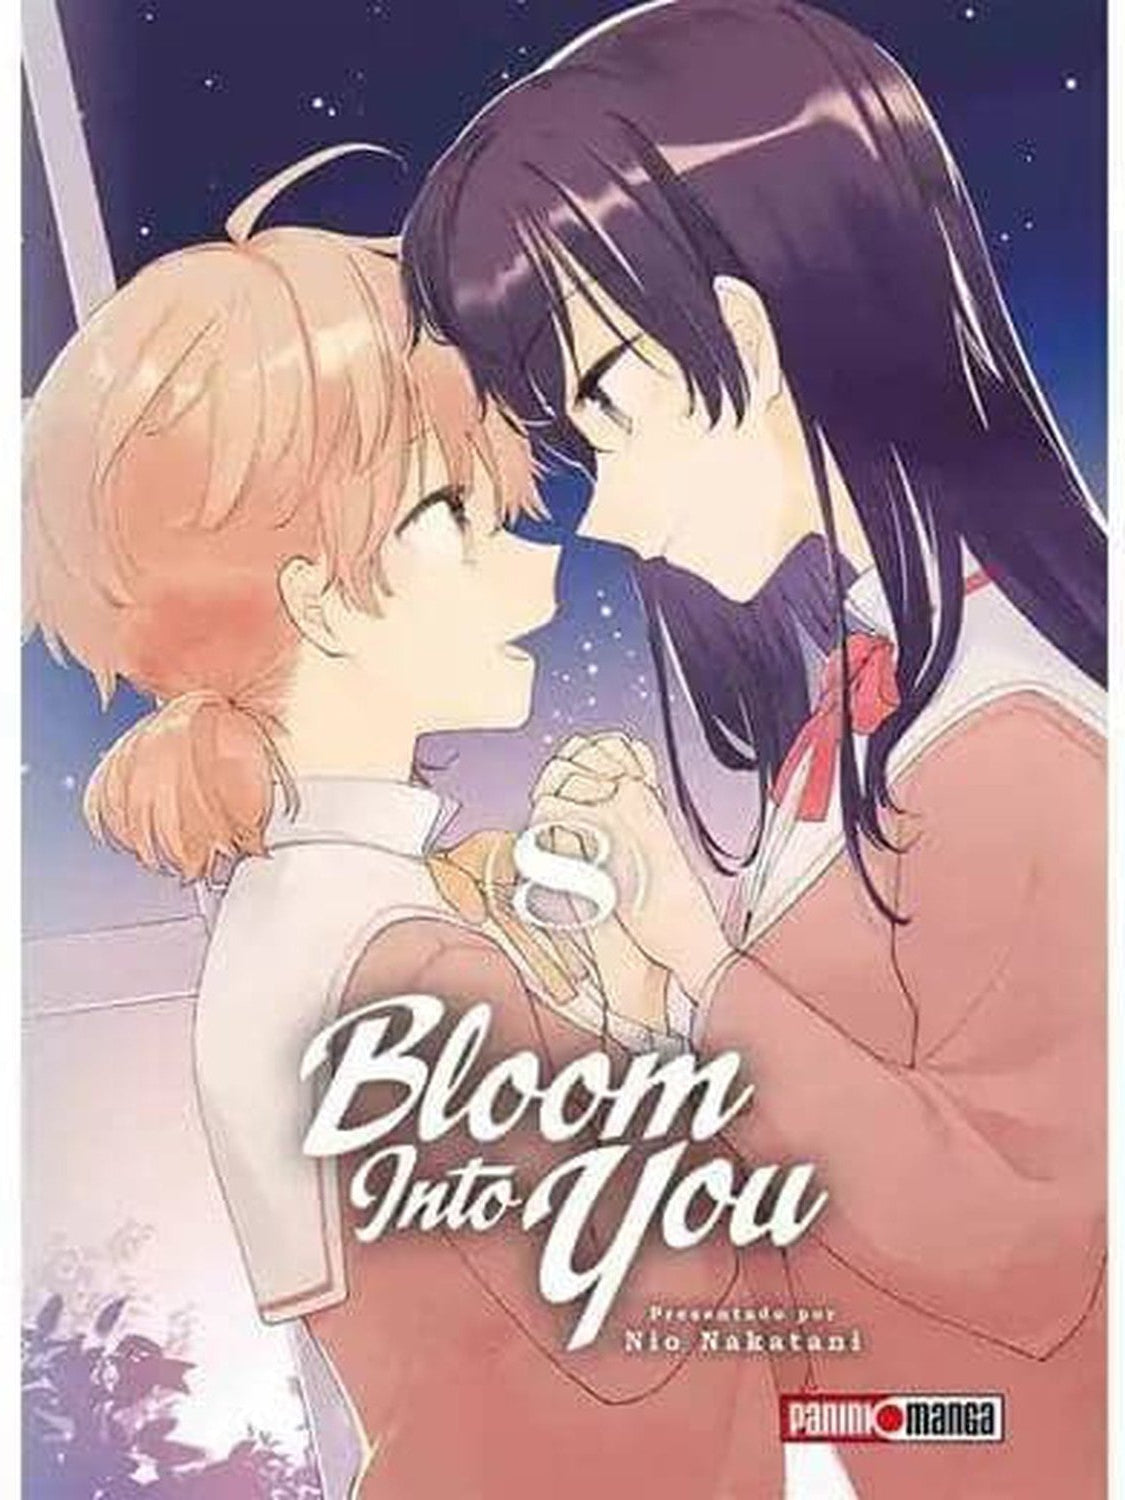 Bloom Into You #8